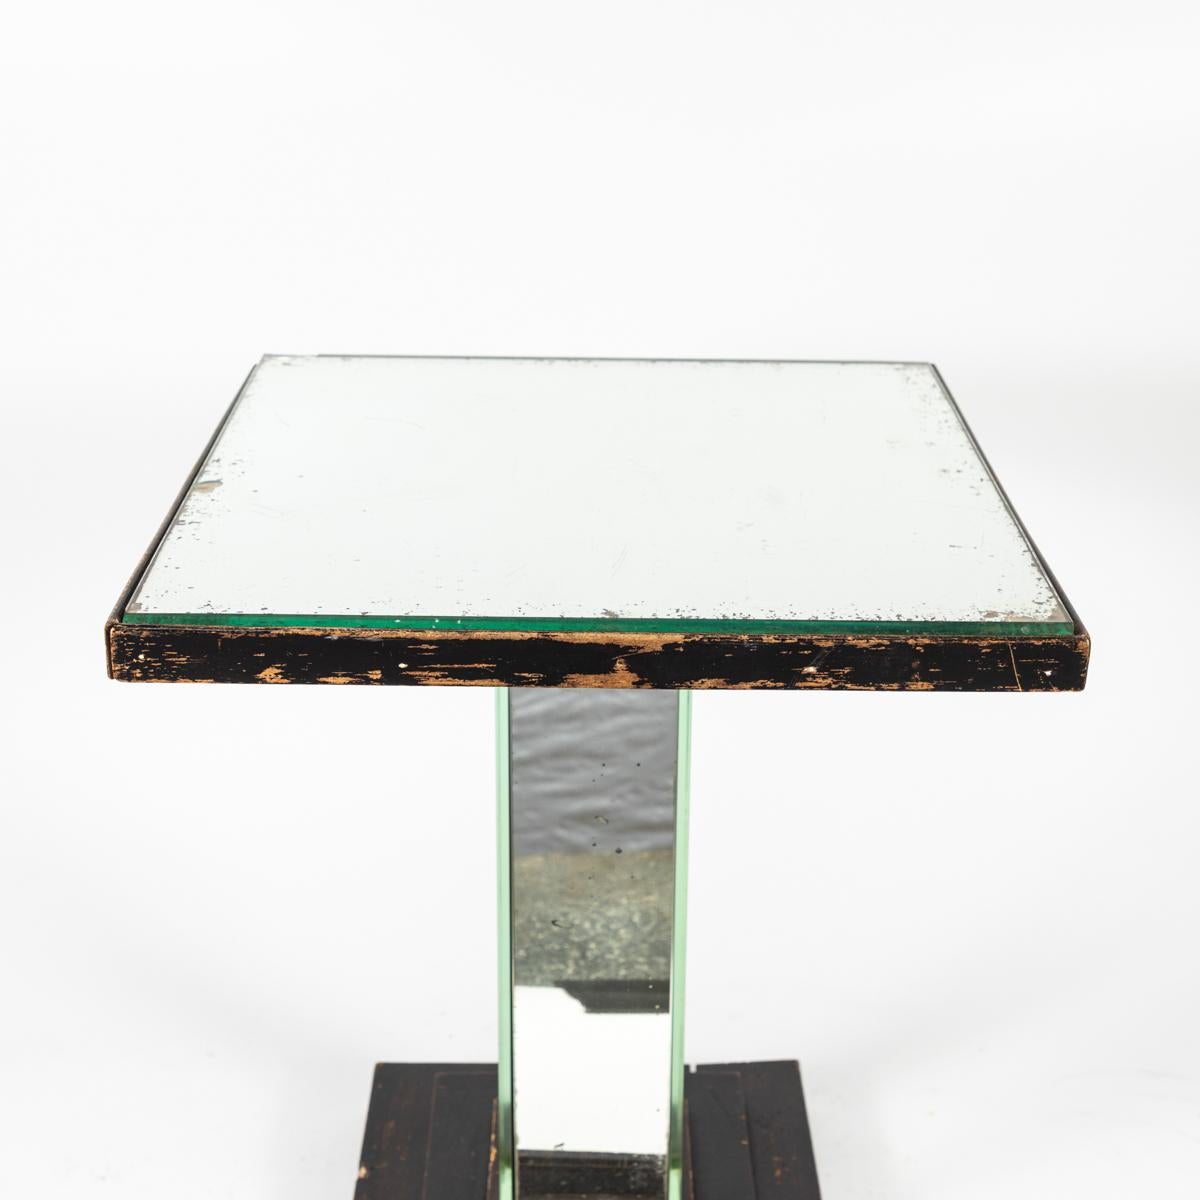 1930s Black English Art Deco side table with a mirrored top.